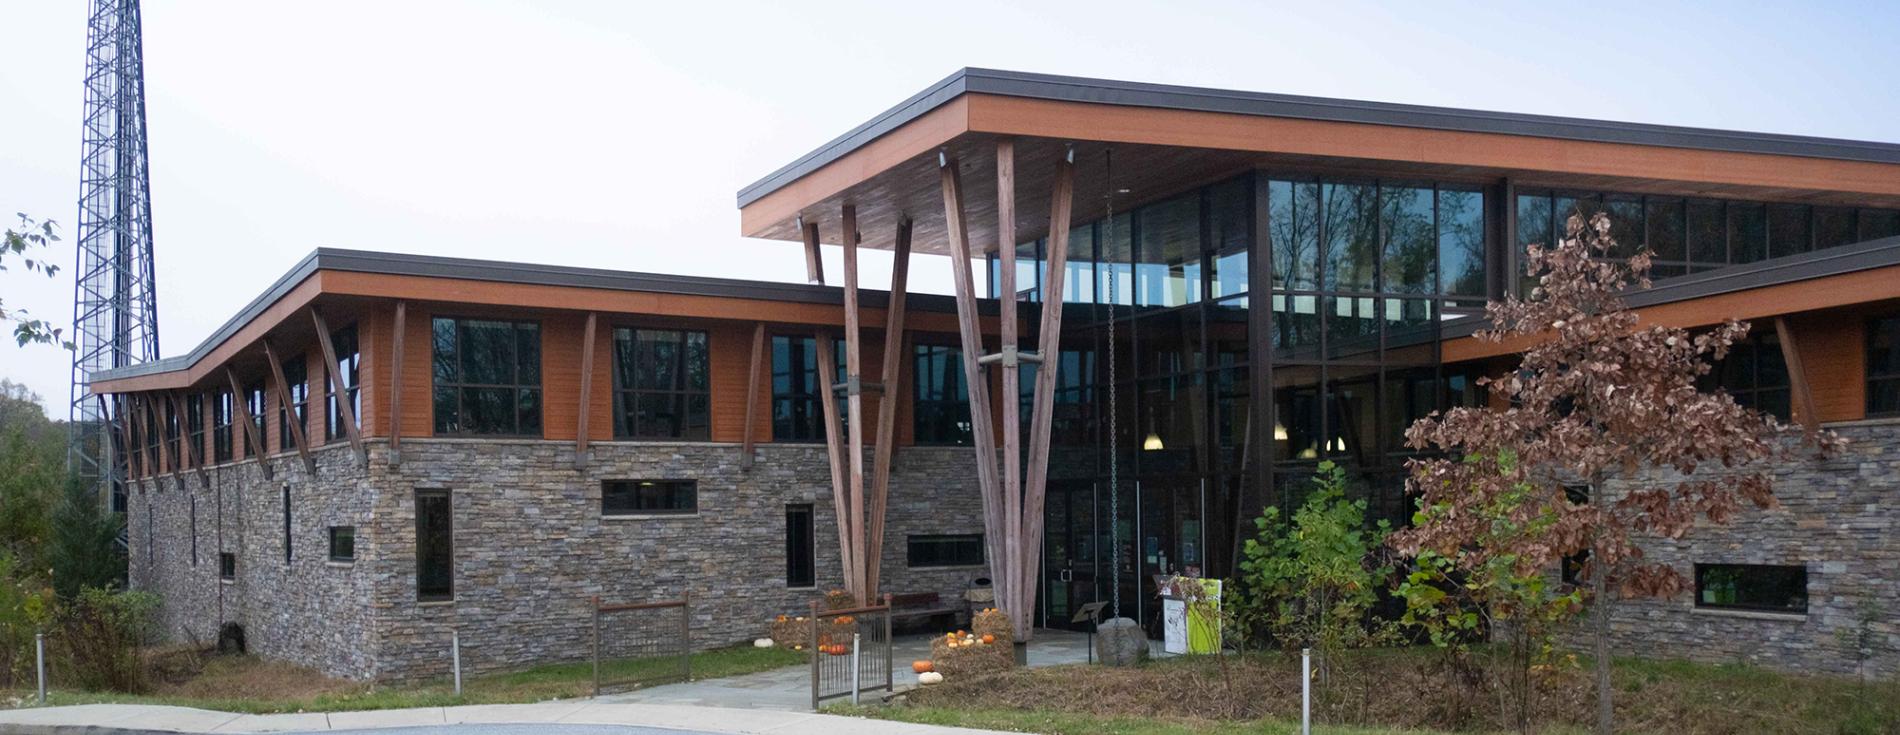 Haverford Community Recreation and Environmental Center